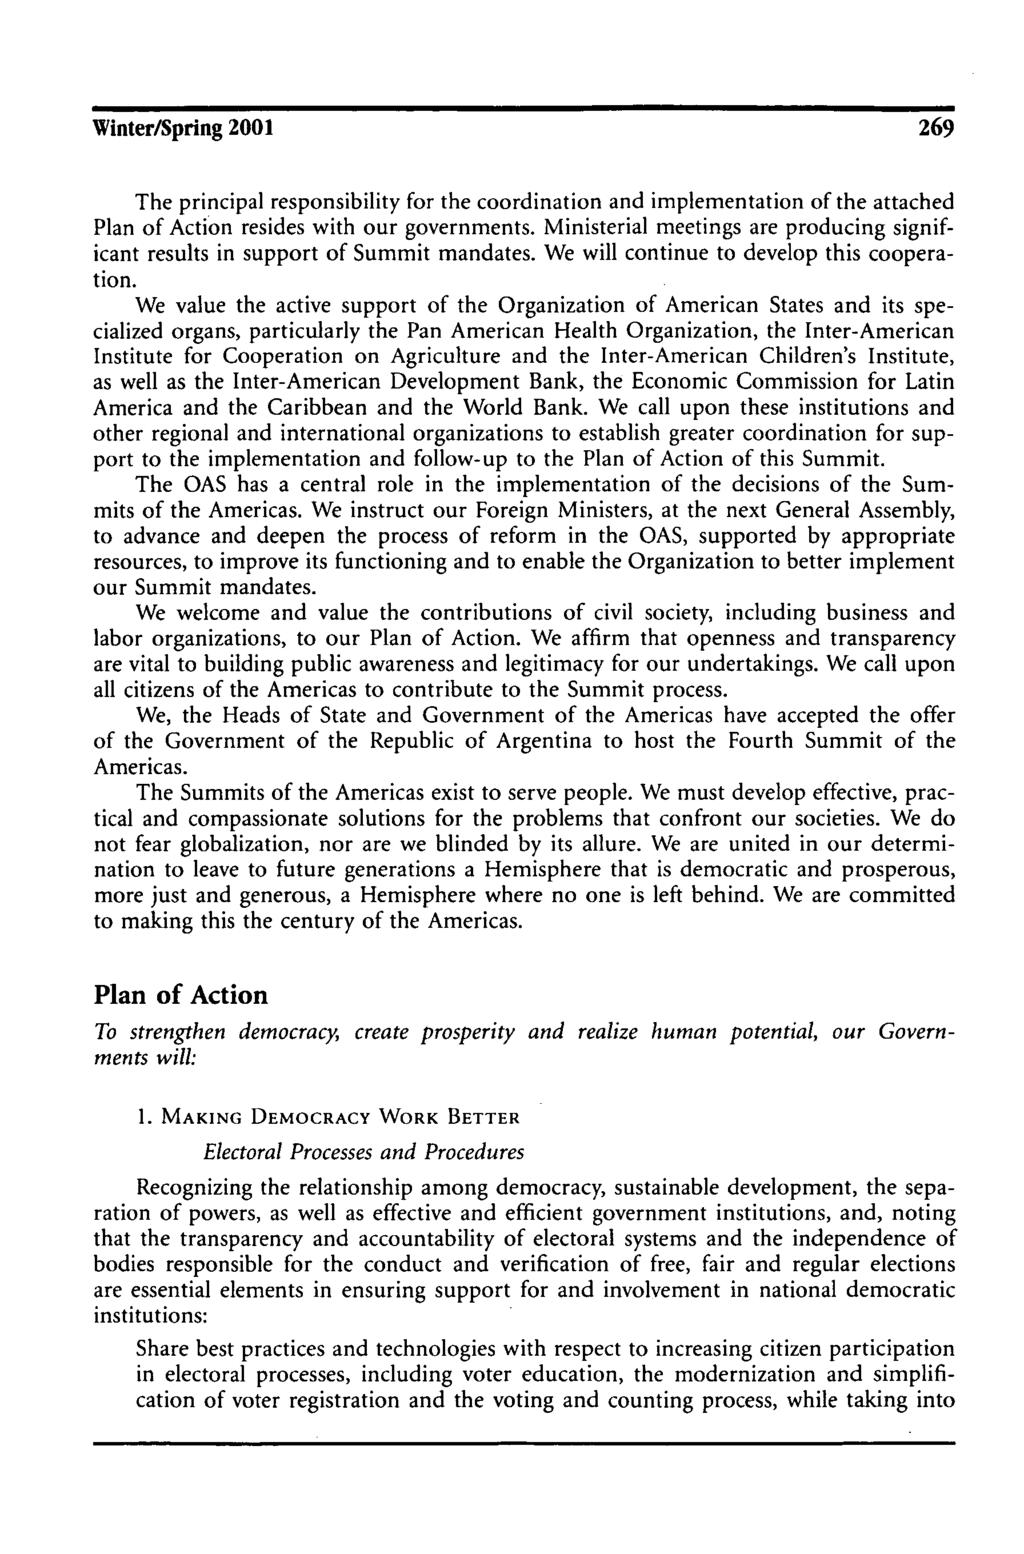 Winter/Spring 2001 269 The principal responsibility for the coordination and implementation of the attached Plan of Action resides with our governments.